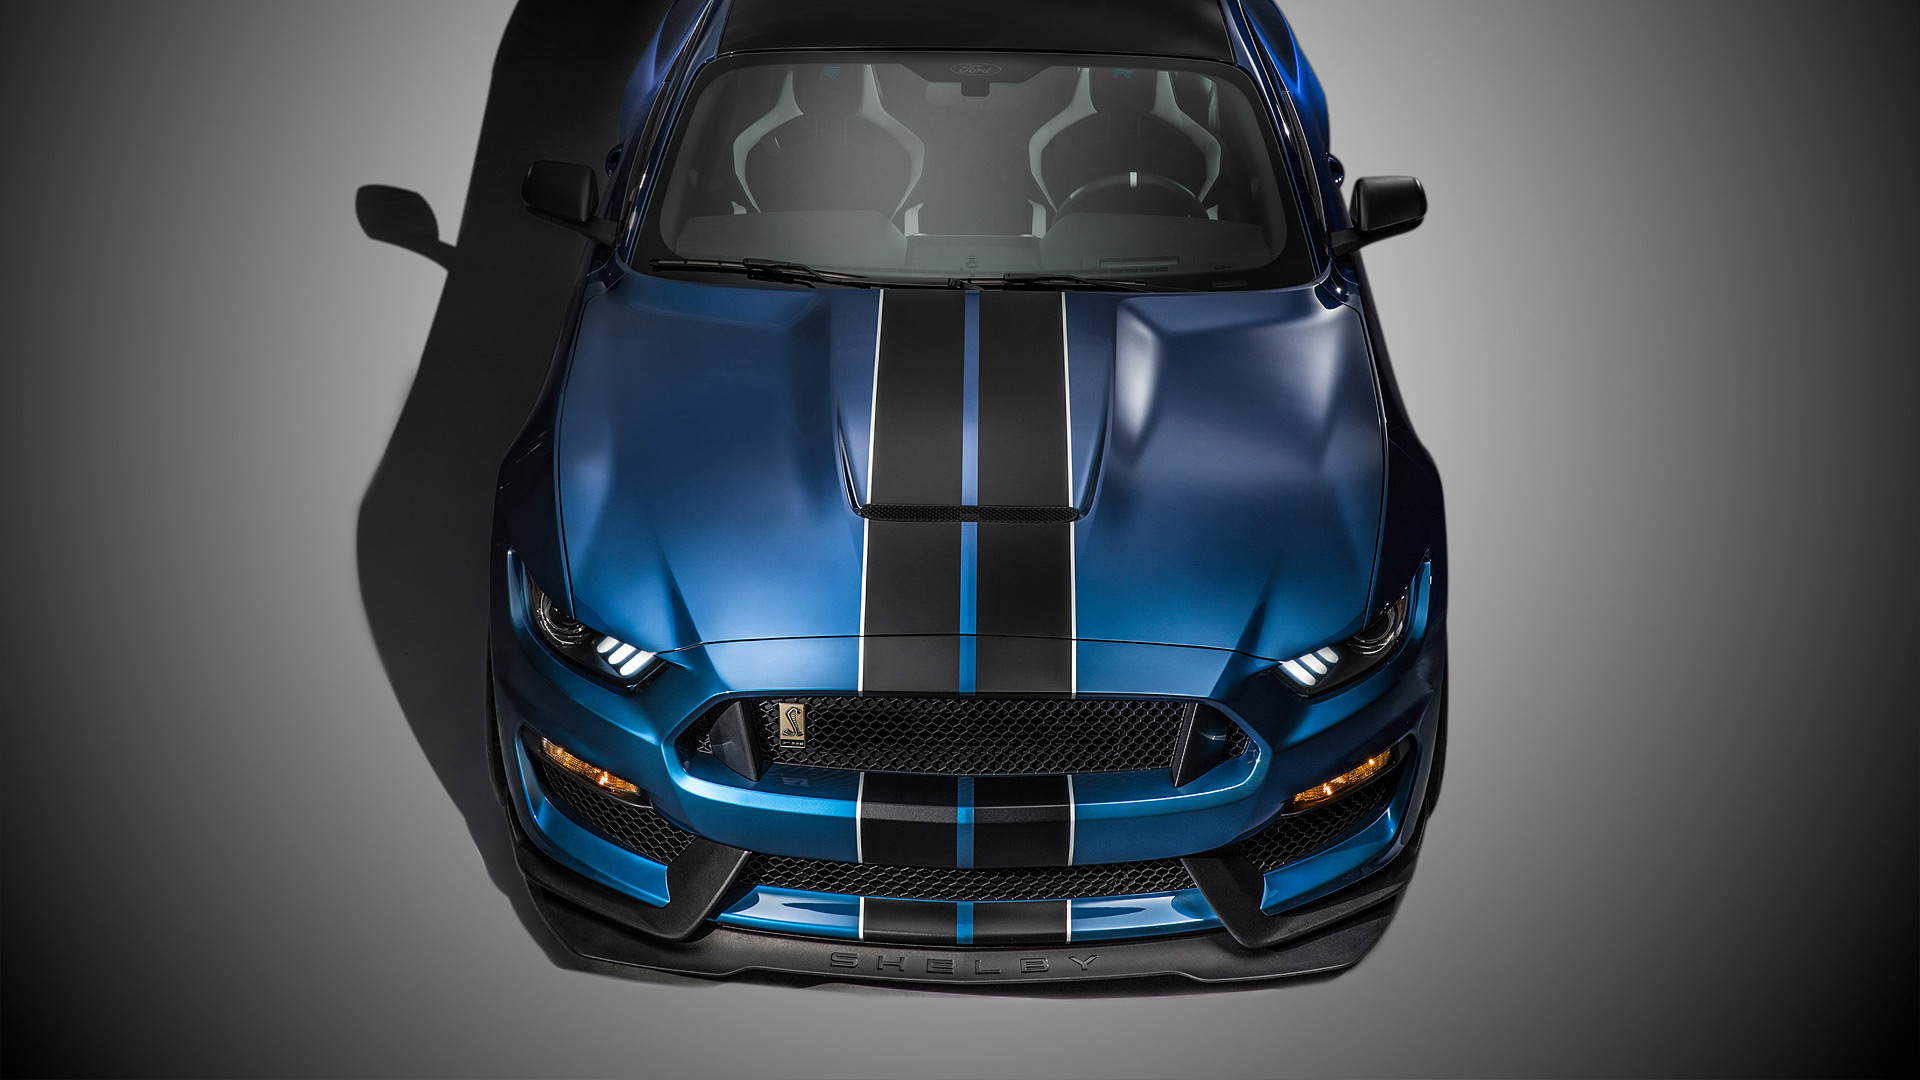 Ford Shelby Mustang Gt350r Wallpaper